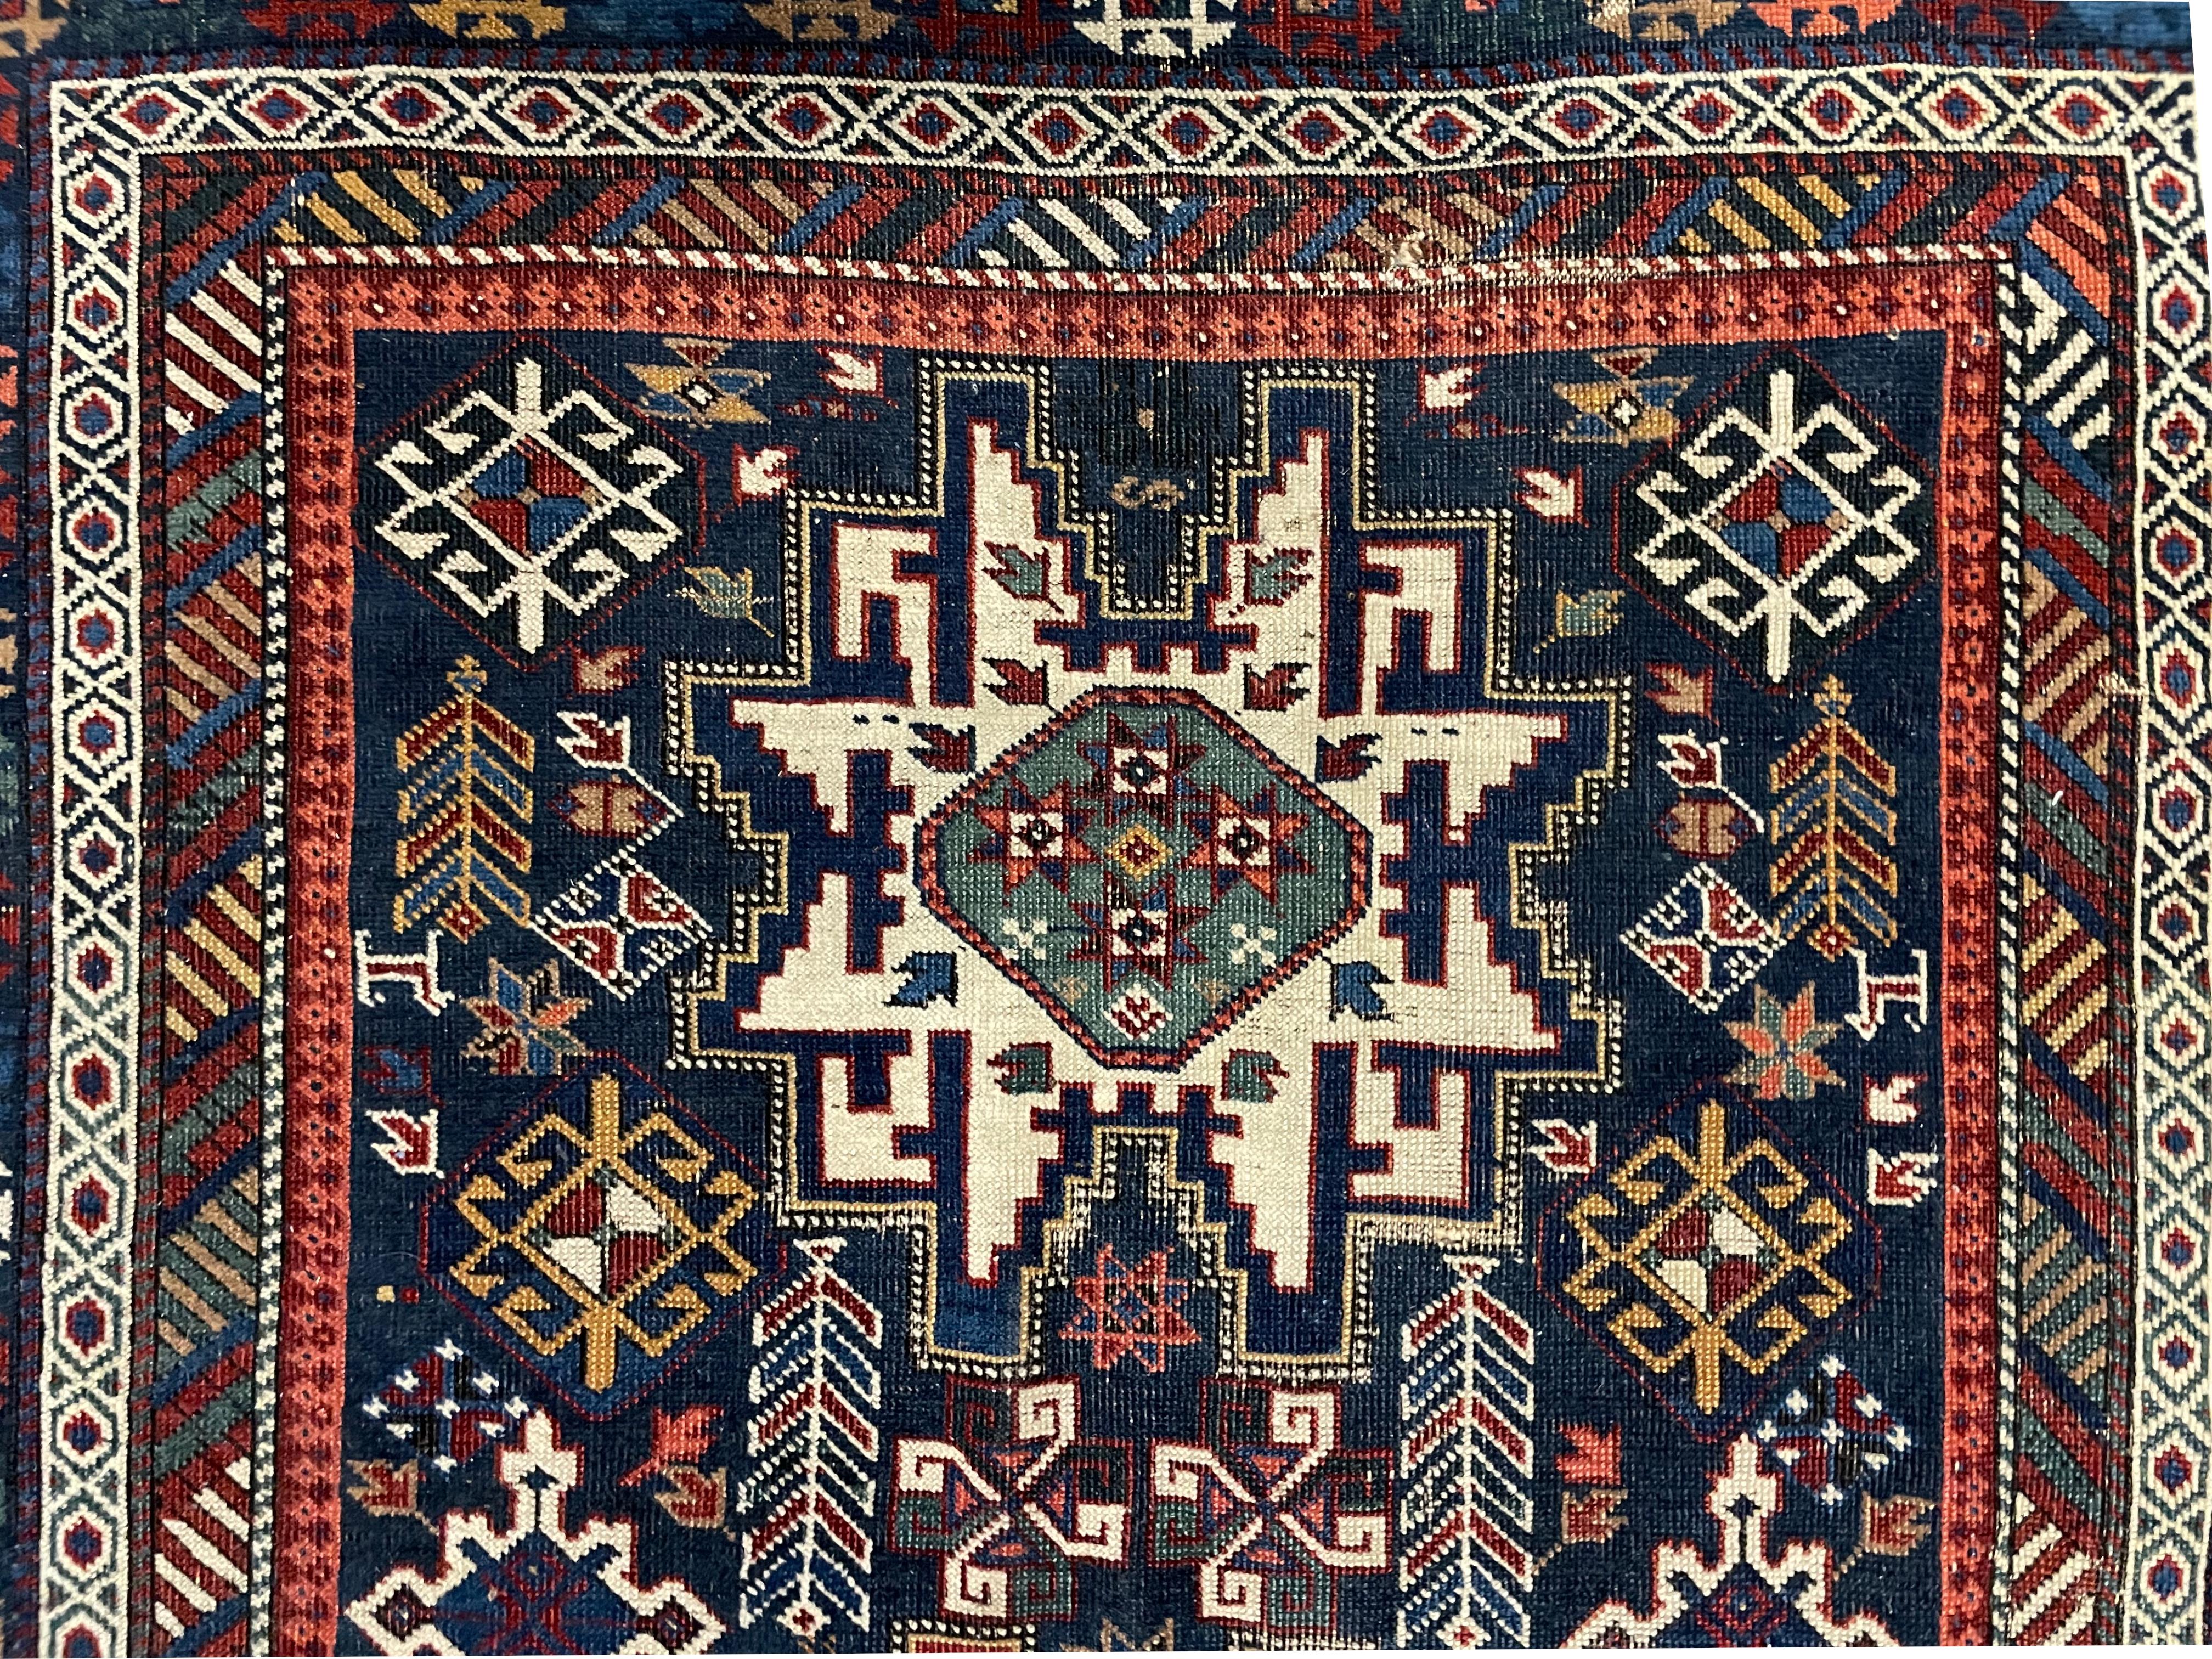 
Antique Kuba Rug
The center blue ground field with three large star-like motifs centered by multiple geometric medallions, with numerous narrow borders each with repeating geometric devices. 
76 in. by 42 in. (193.04 x 106.68 cm.) (wear and repairs